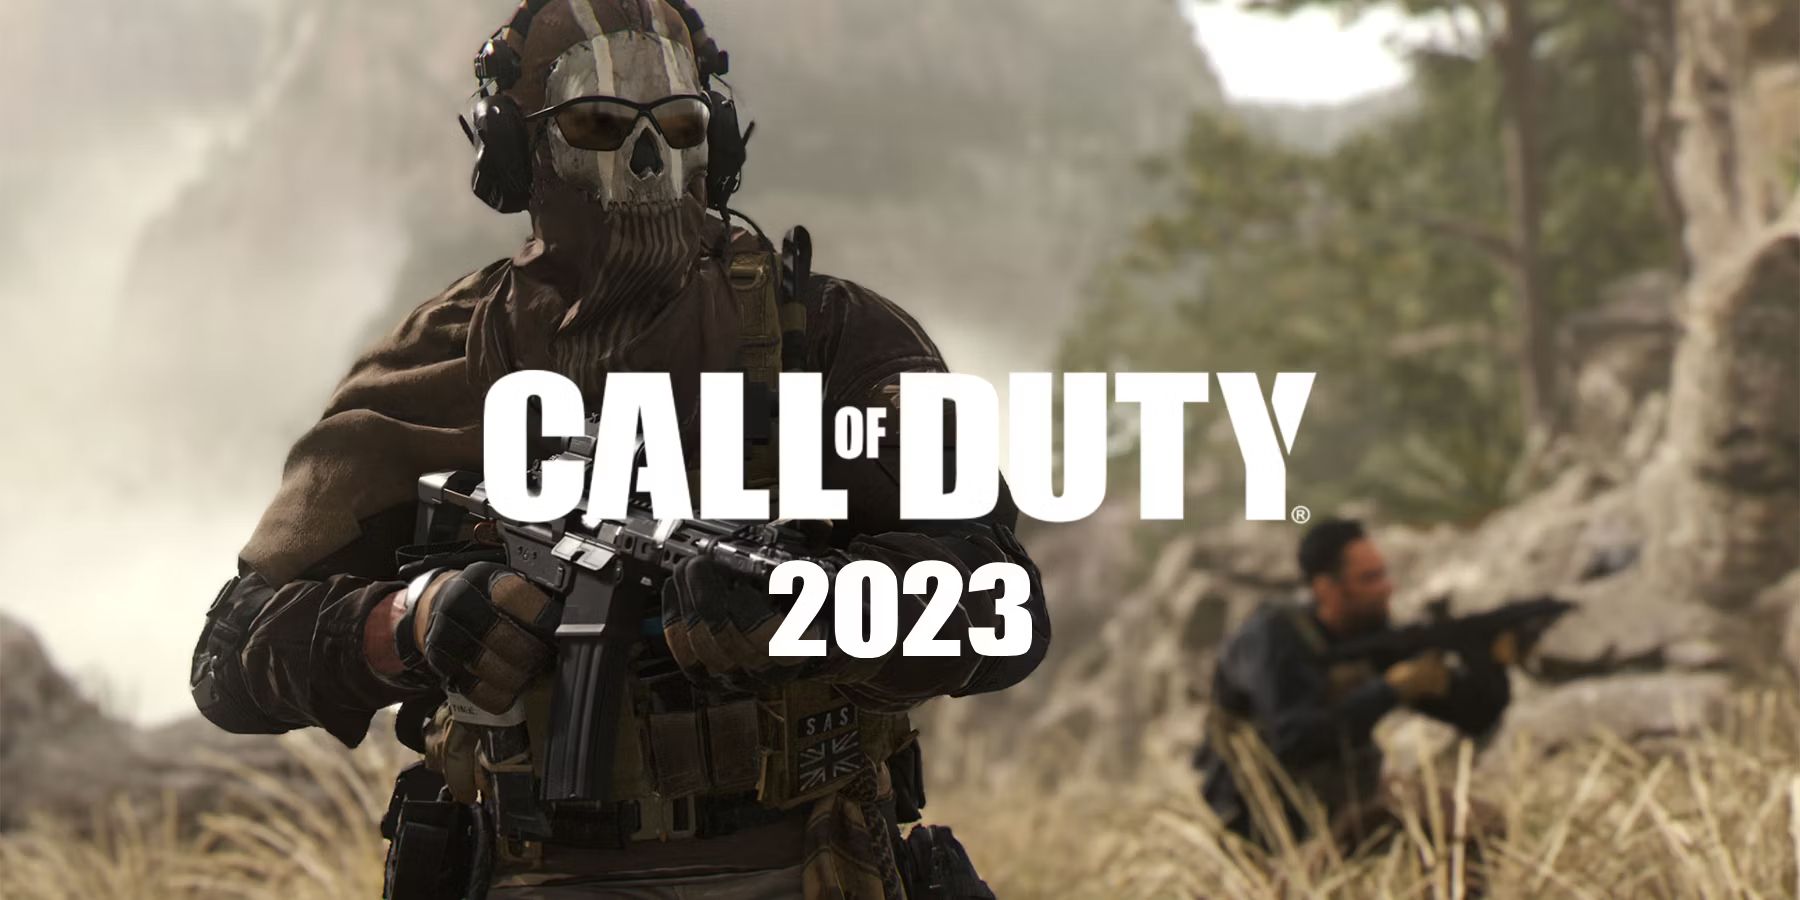 Call of duty 2023 требования. Call of Duty 2023. Новая Call of Duty 2023. Салл оф дьюти 2023. Cover line of Duty 2023.